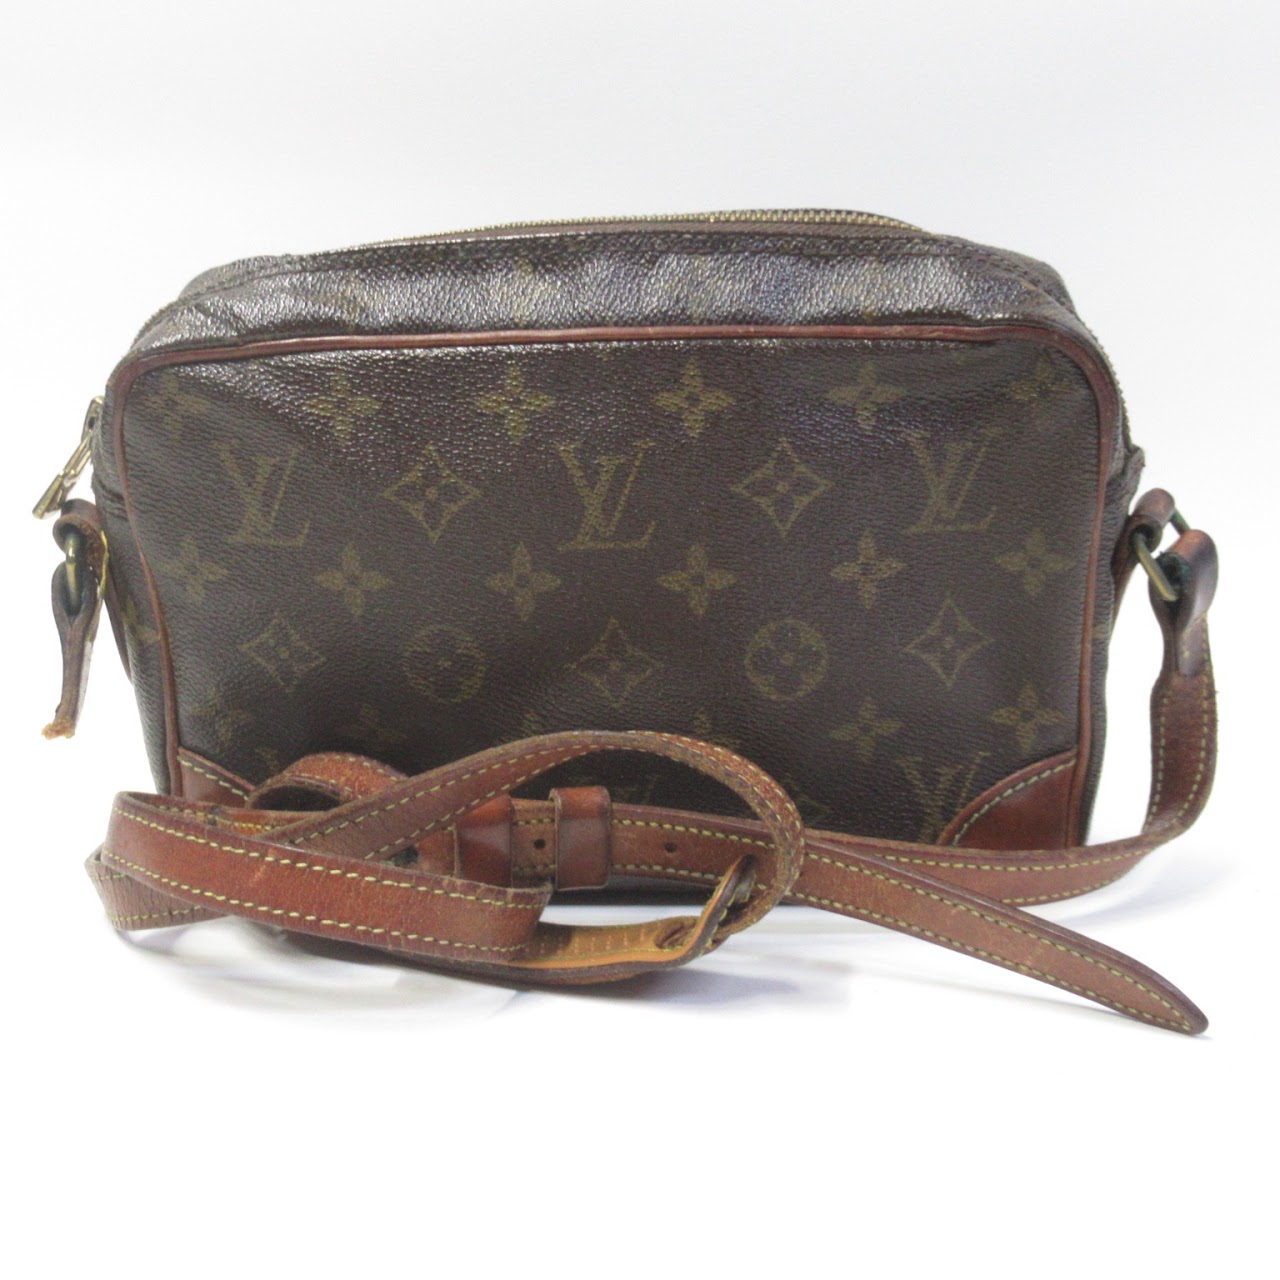 1980s Louis Vuitton - 59 For Sale on 1stDibs  louis vuitton vintage bags  1980s, 1986 louis vuitton bag, how much were louis vuitton bags in the 80s